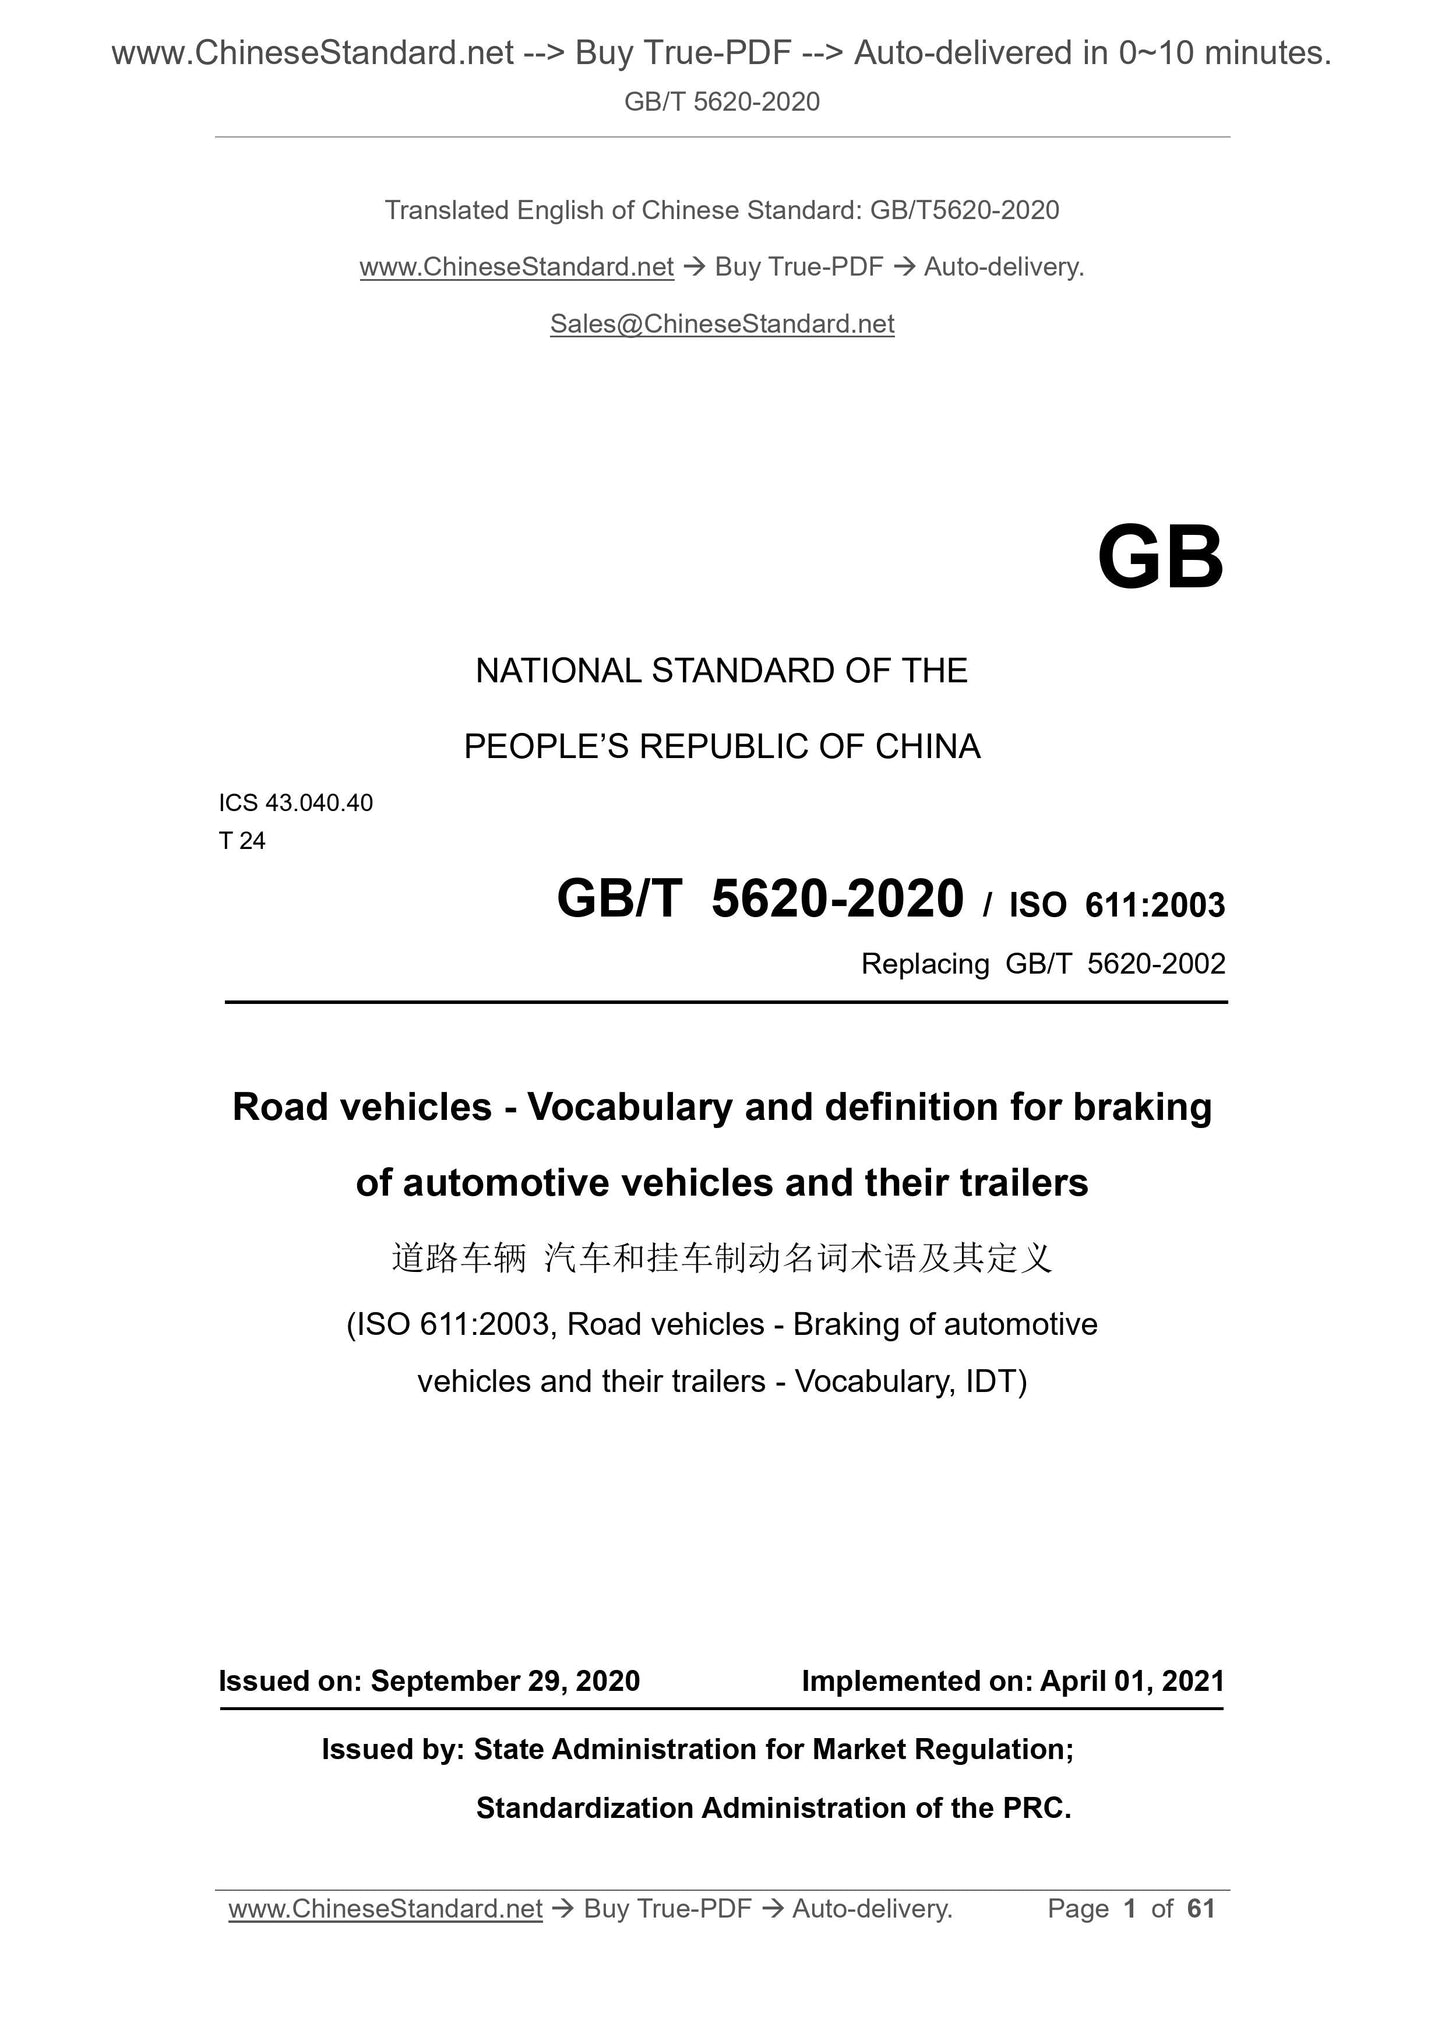 GB/T 5620-2020 Page 1